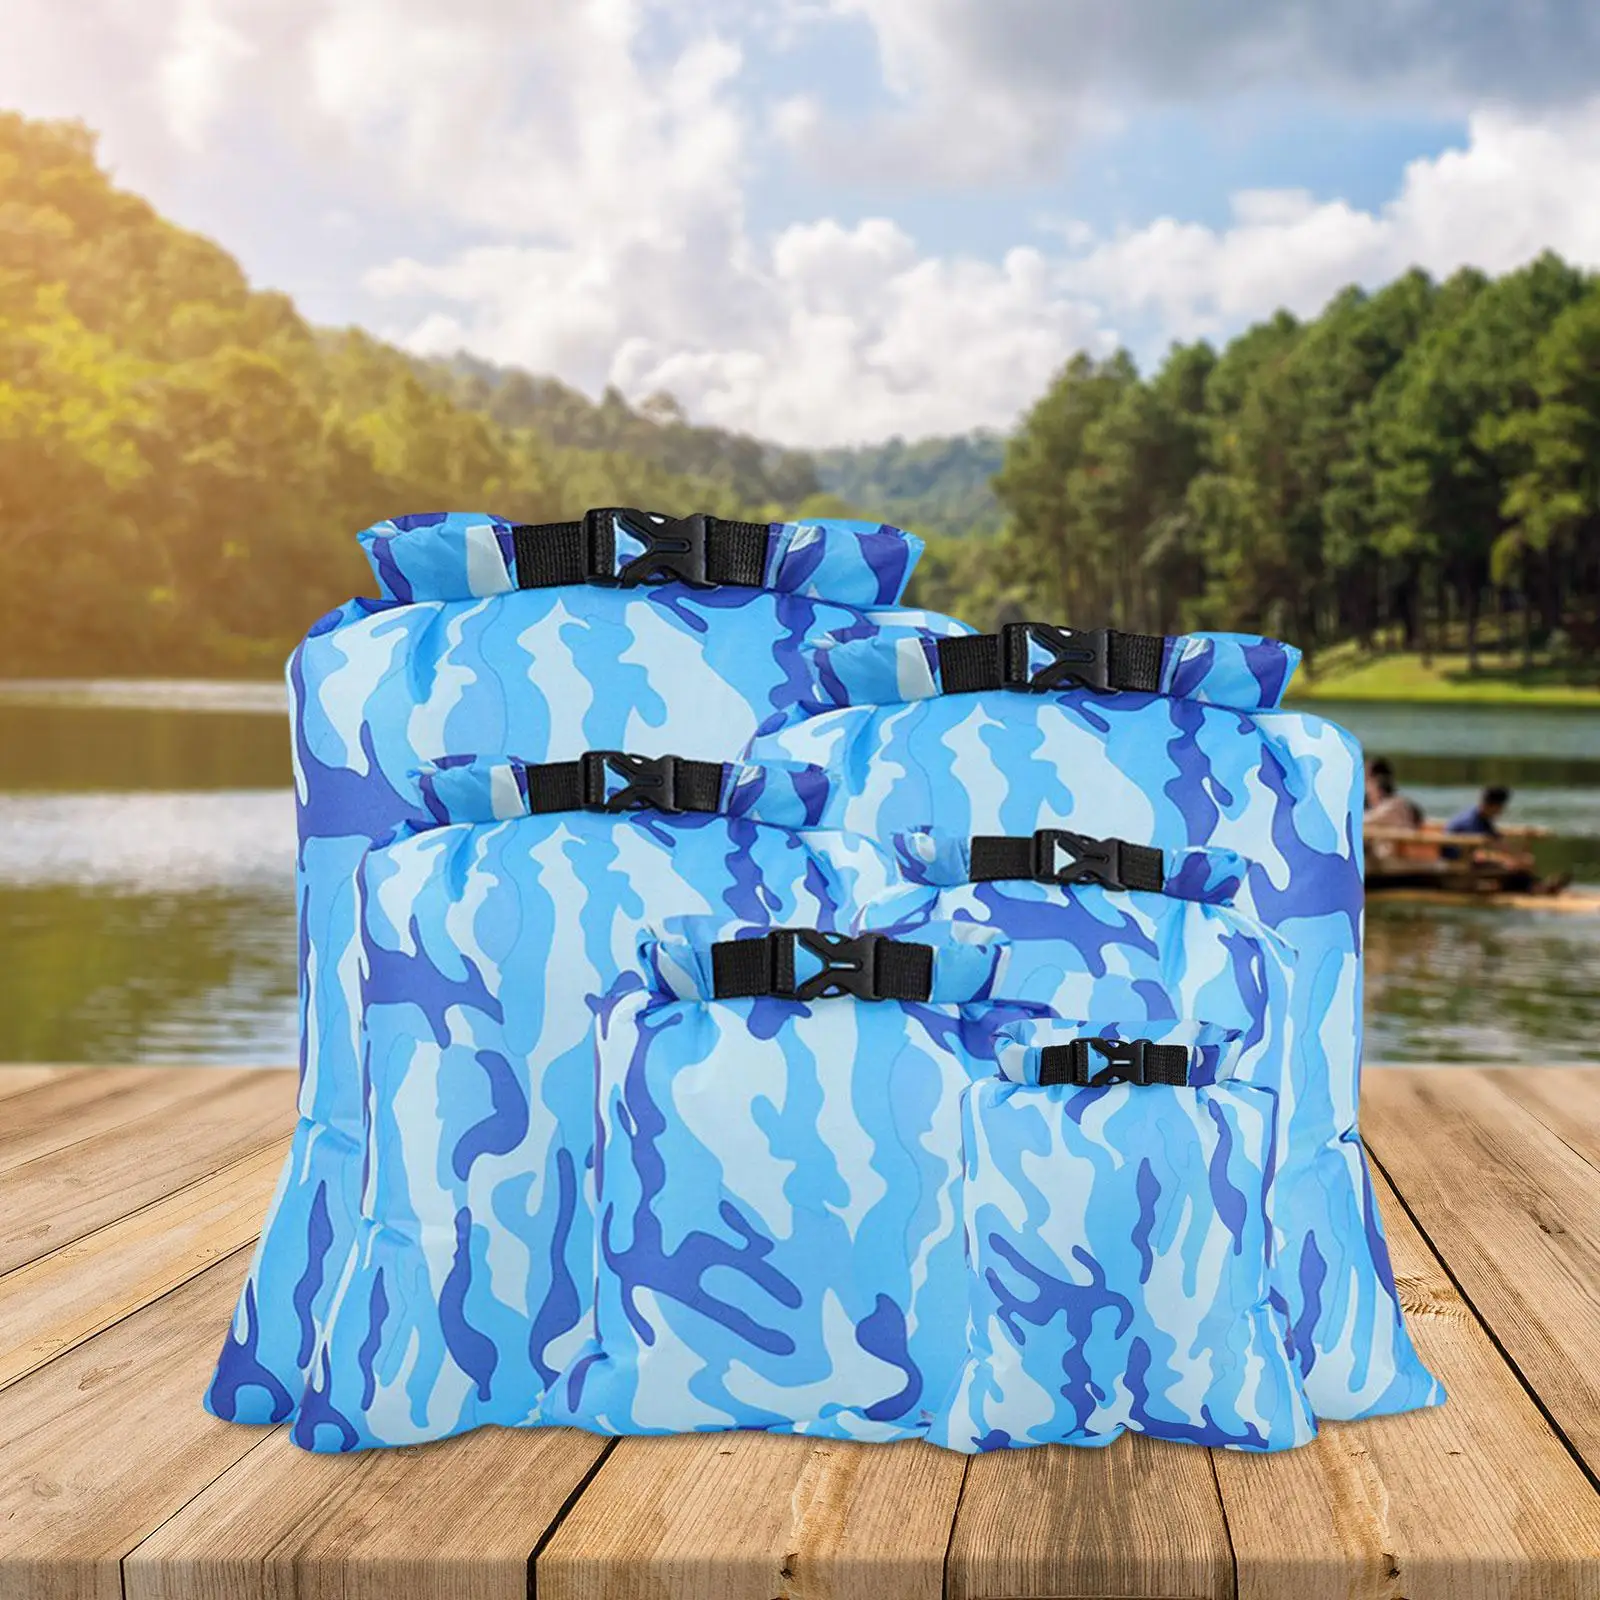 6Pcs Waterproof Dry Bag Roll Top Compression Lightweight 1.5/2.5/3/3.5/5/8L Keeps Gear Dry Sacks for Swimming Sailing Canoeing